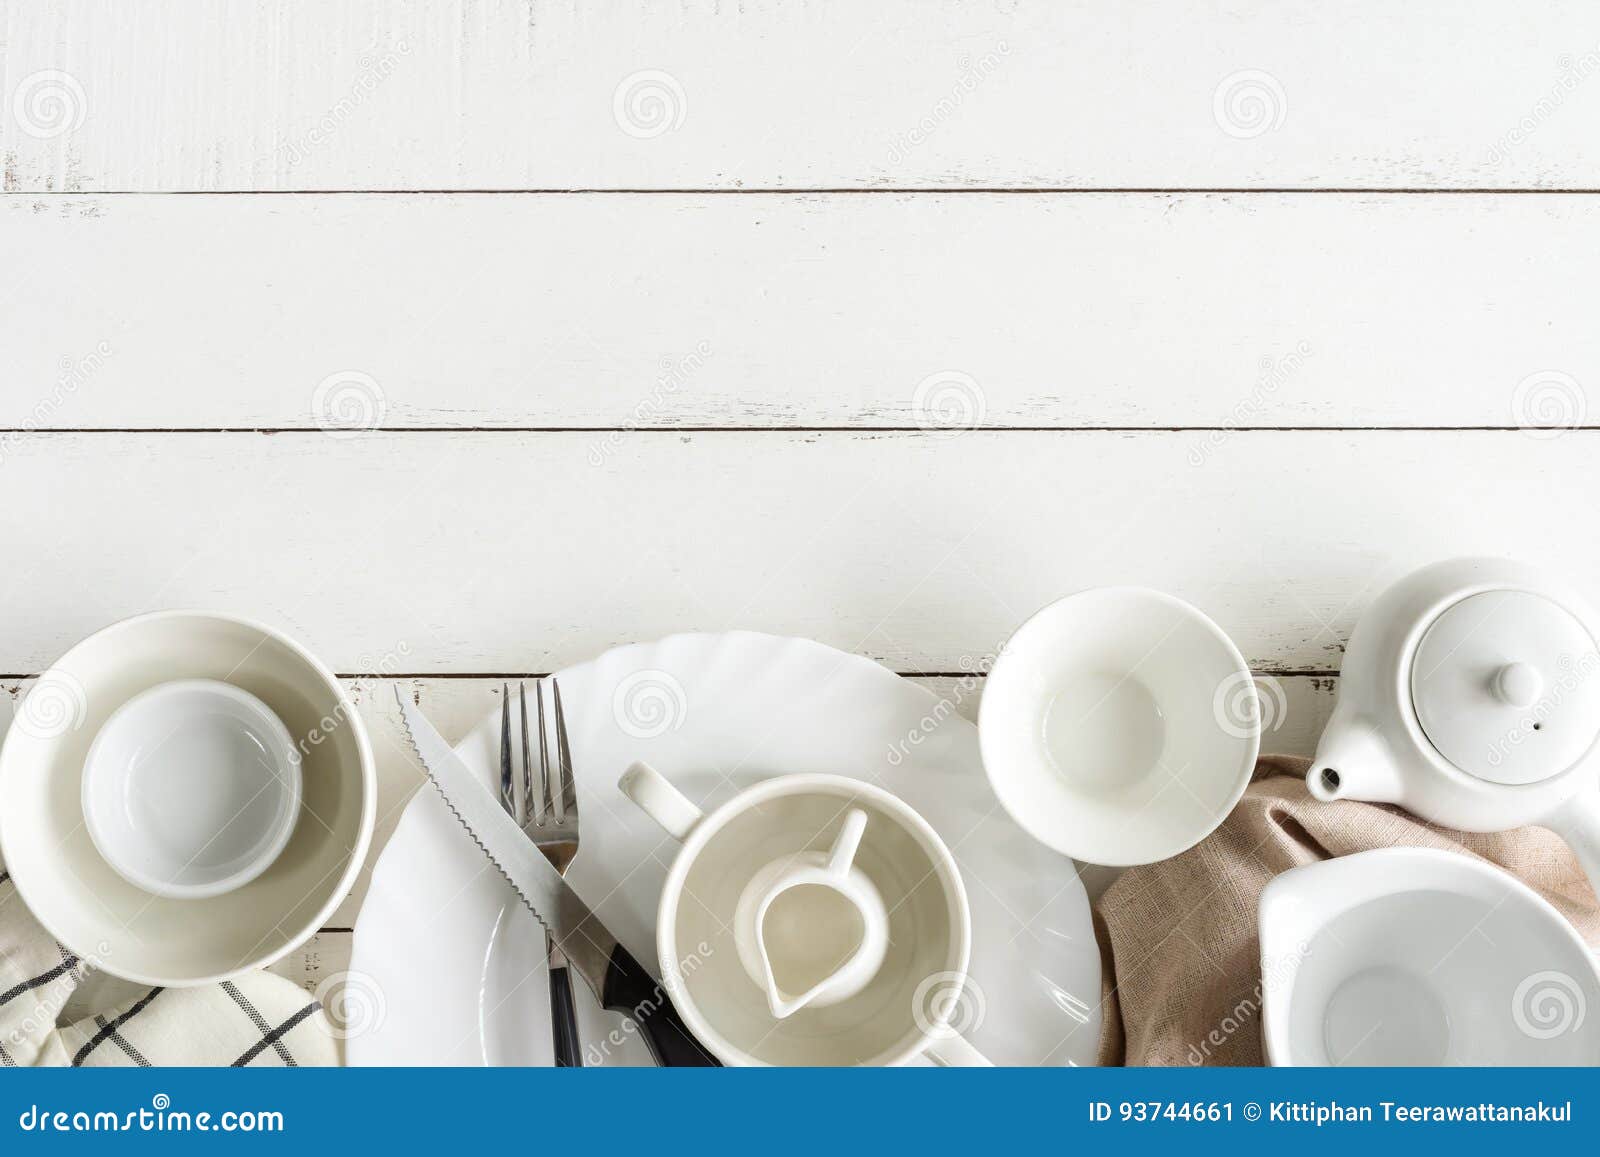 White Empty Dishes on Wooden Table with Copy Space Stock Image - Image ...